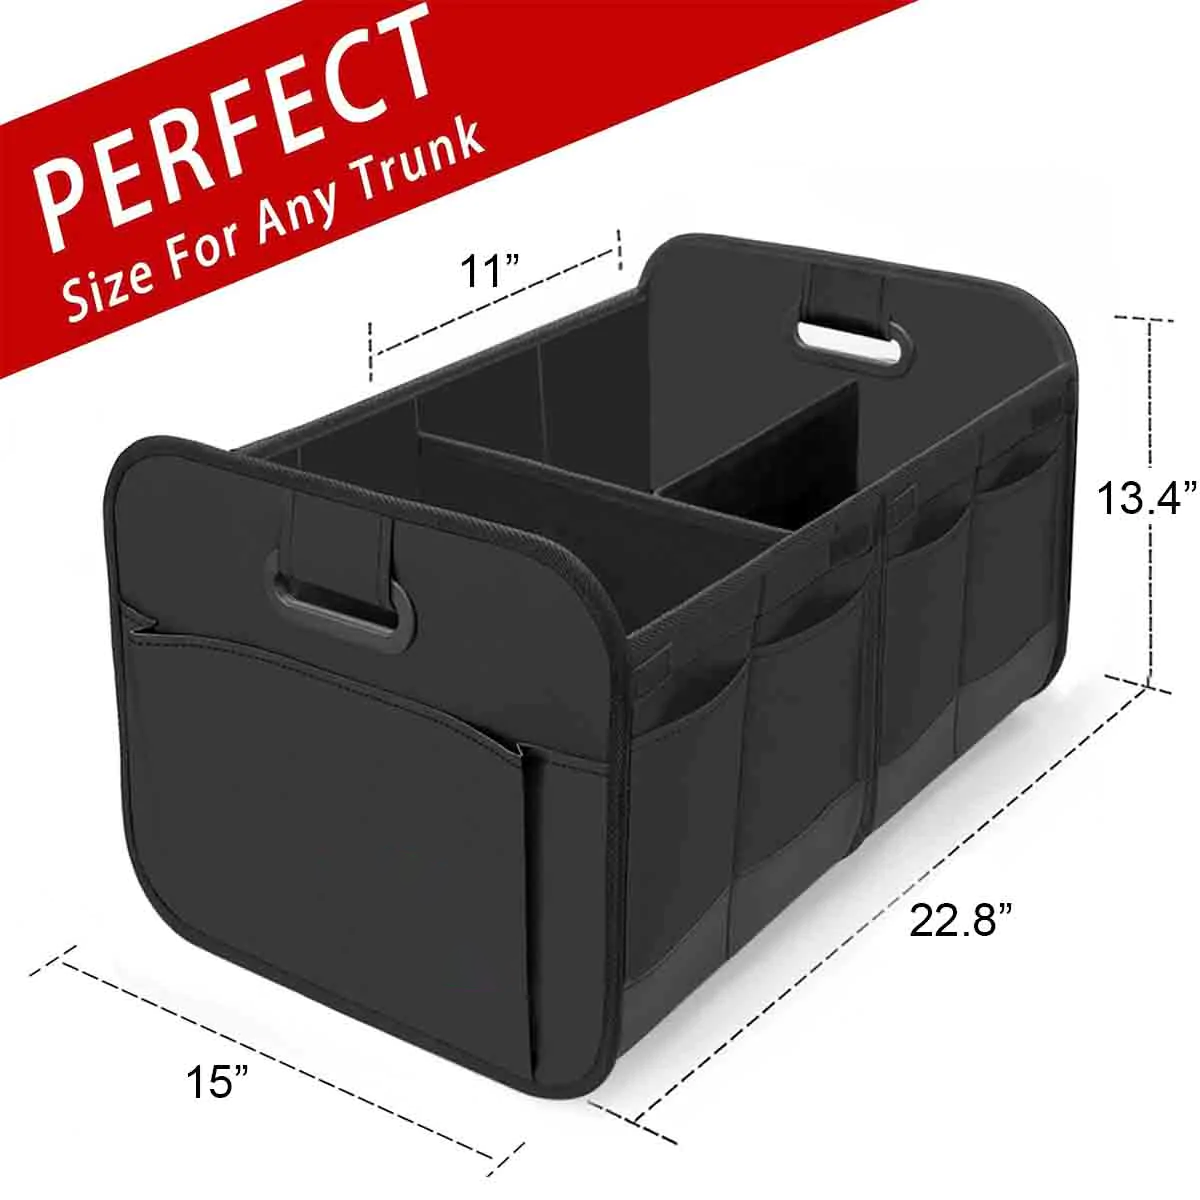 Custom Text For Car Trunk Organizer Storage, Compatible with All Cars, Reinforced Handles, Collapsible Multi, Compartment Car Organizers, Foldable and Waterproof, 600D Oxford Polyester SA12995